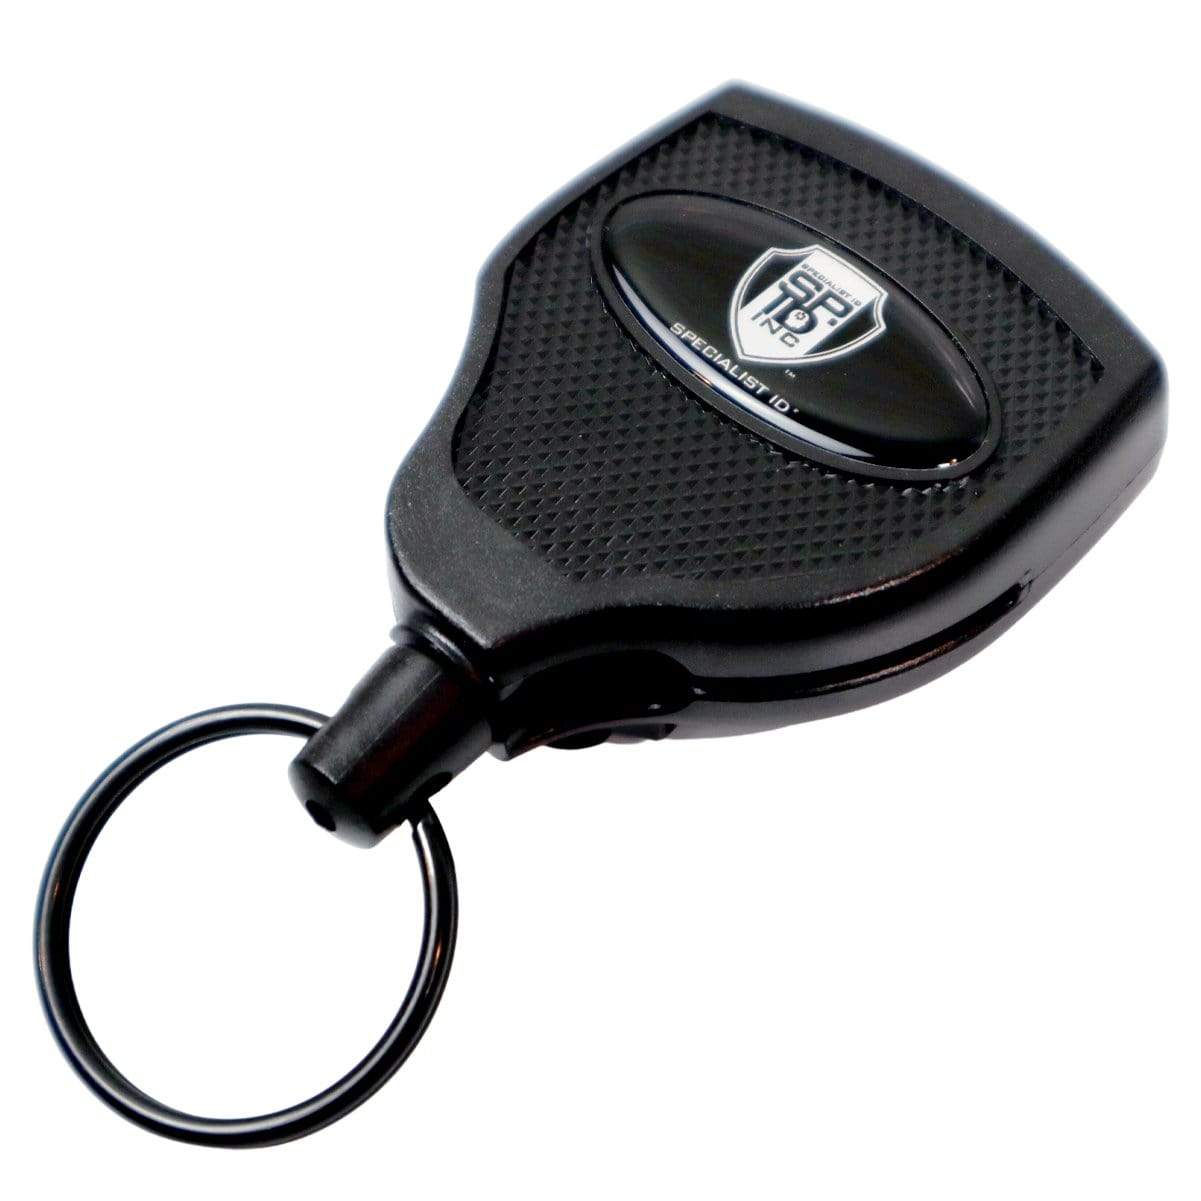 Super Heavy Duty Retractable Keychain and more at